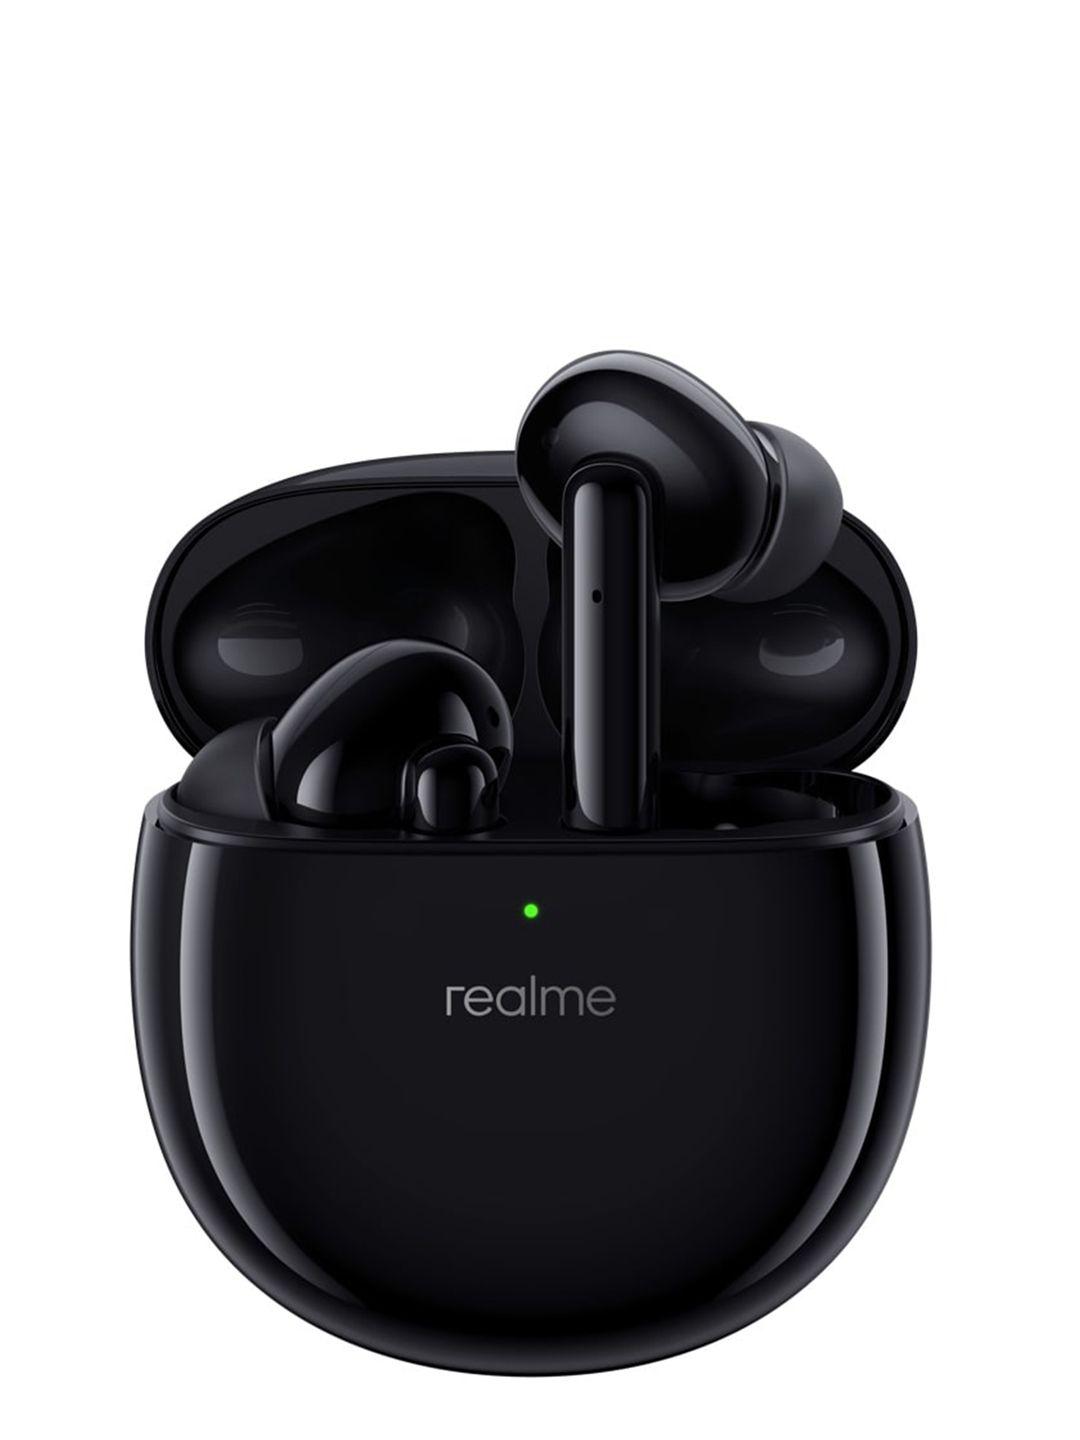 realme-matte-black-buds-air-pro-active-noise-cancellation-enabled-bluetooth-headset--true-wireless